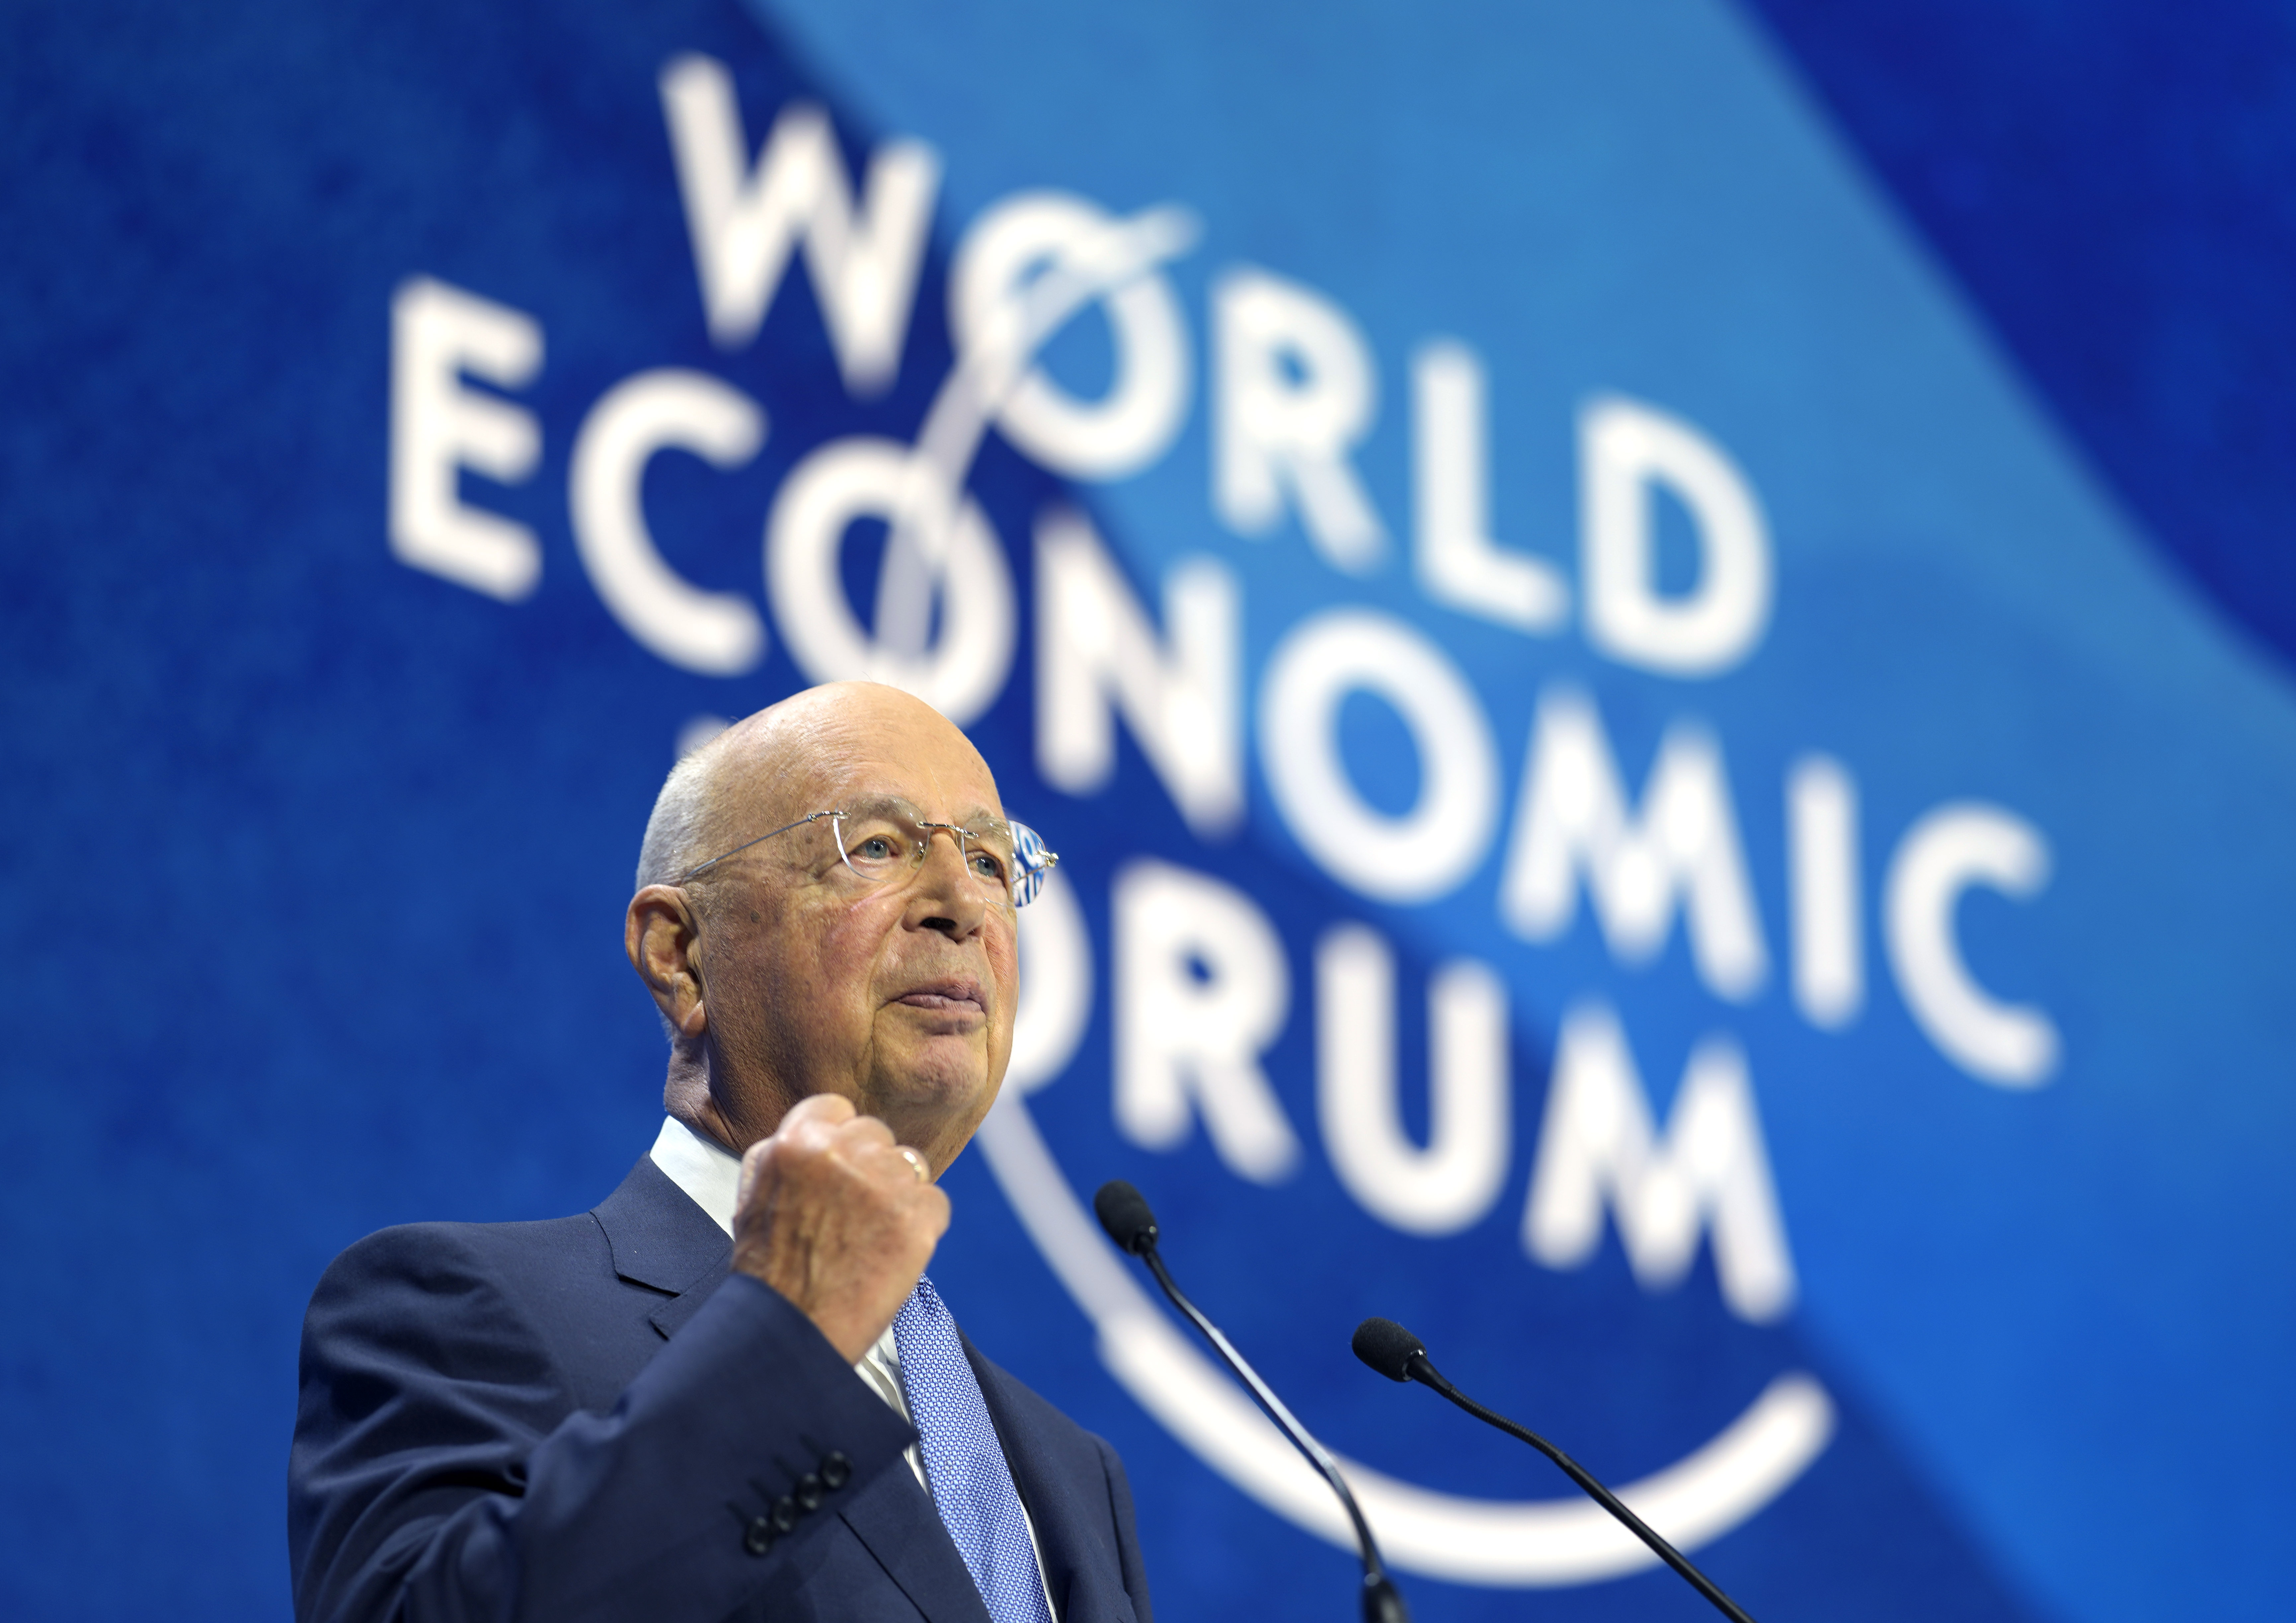 Davos: AP pioneers in decarbonized economy, say panelists at WEF